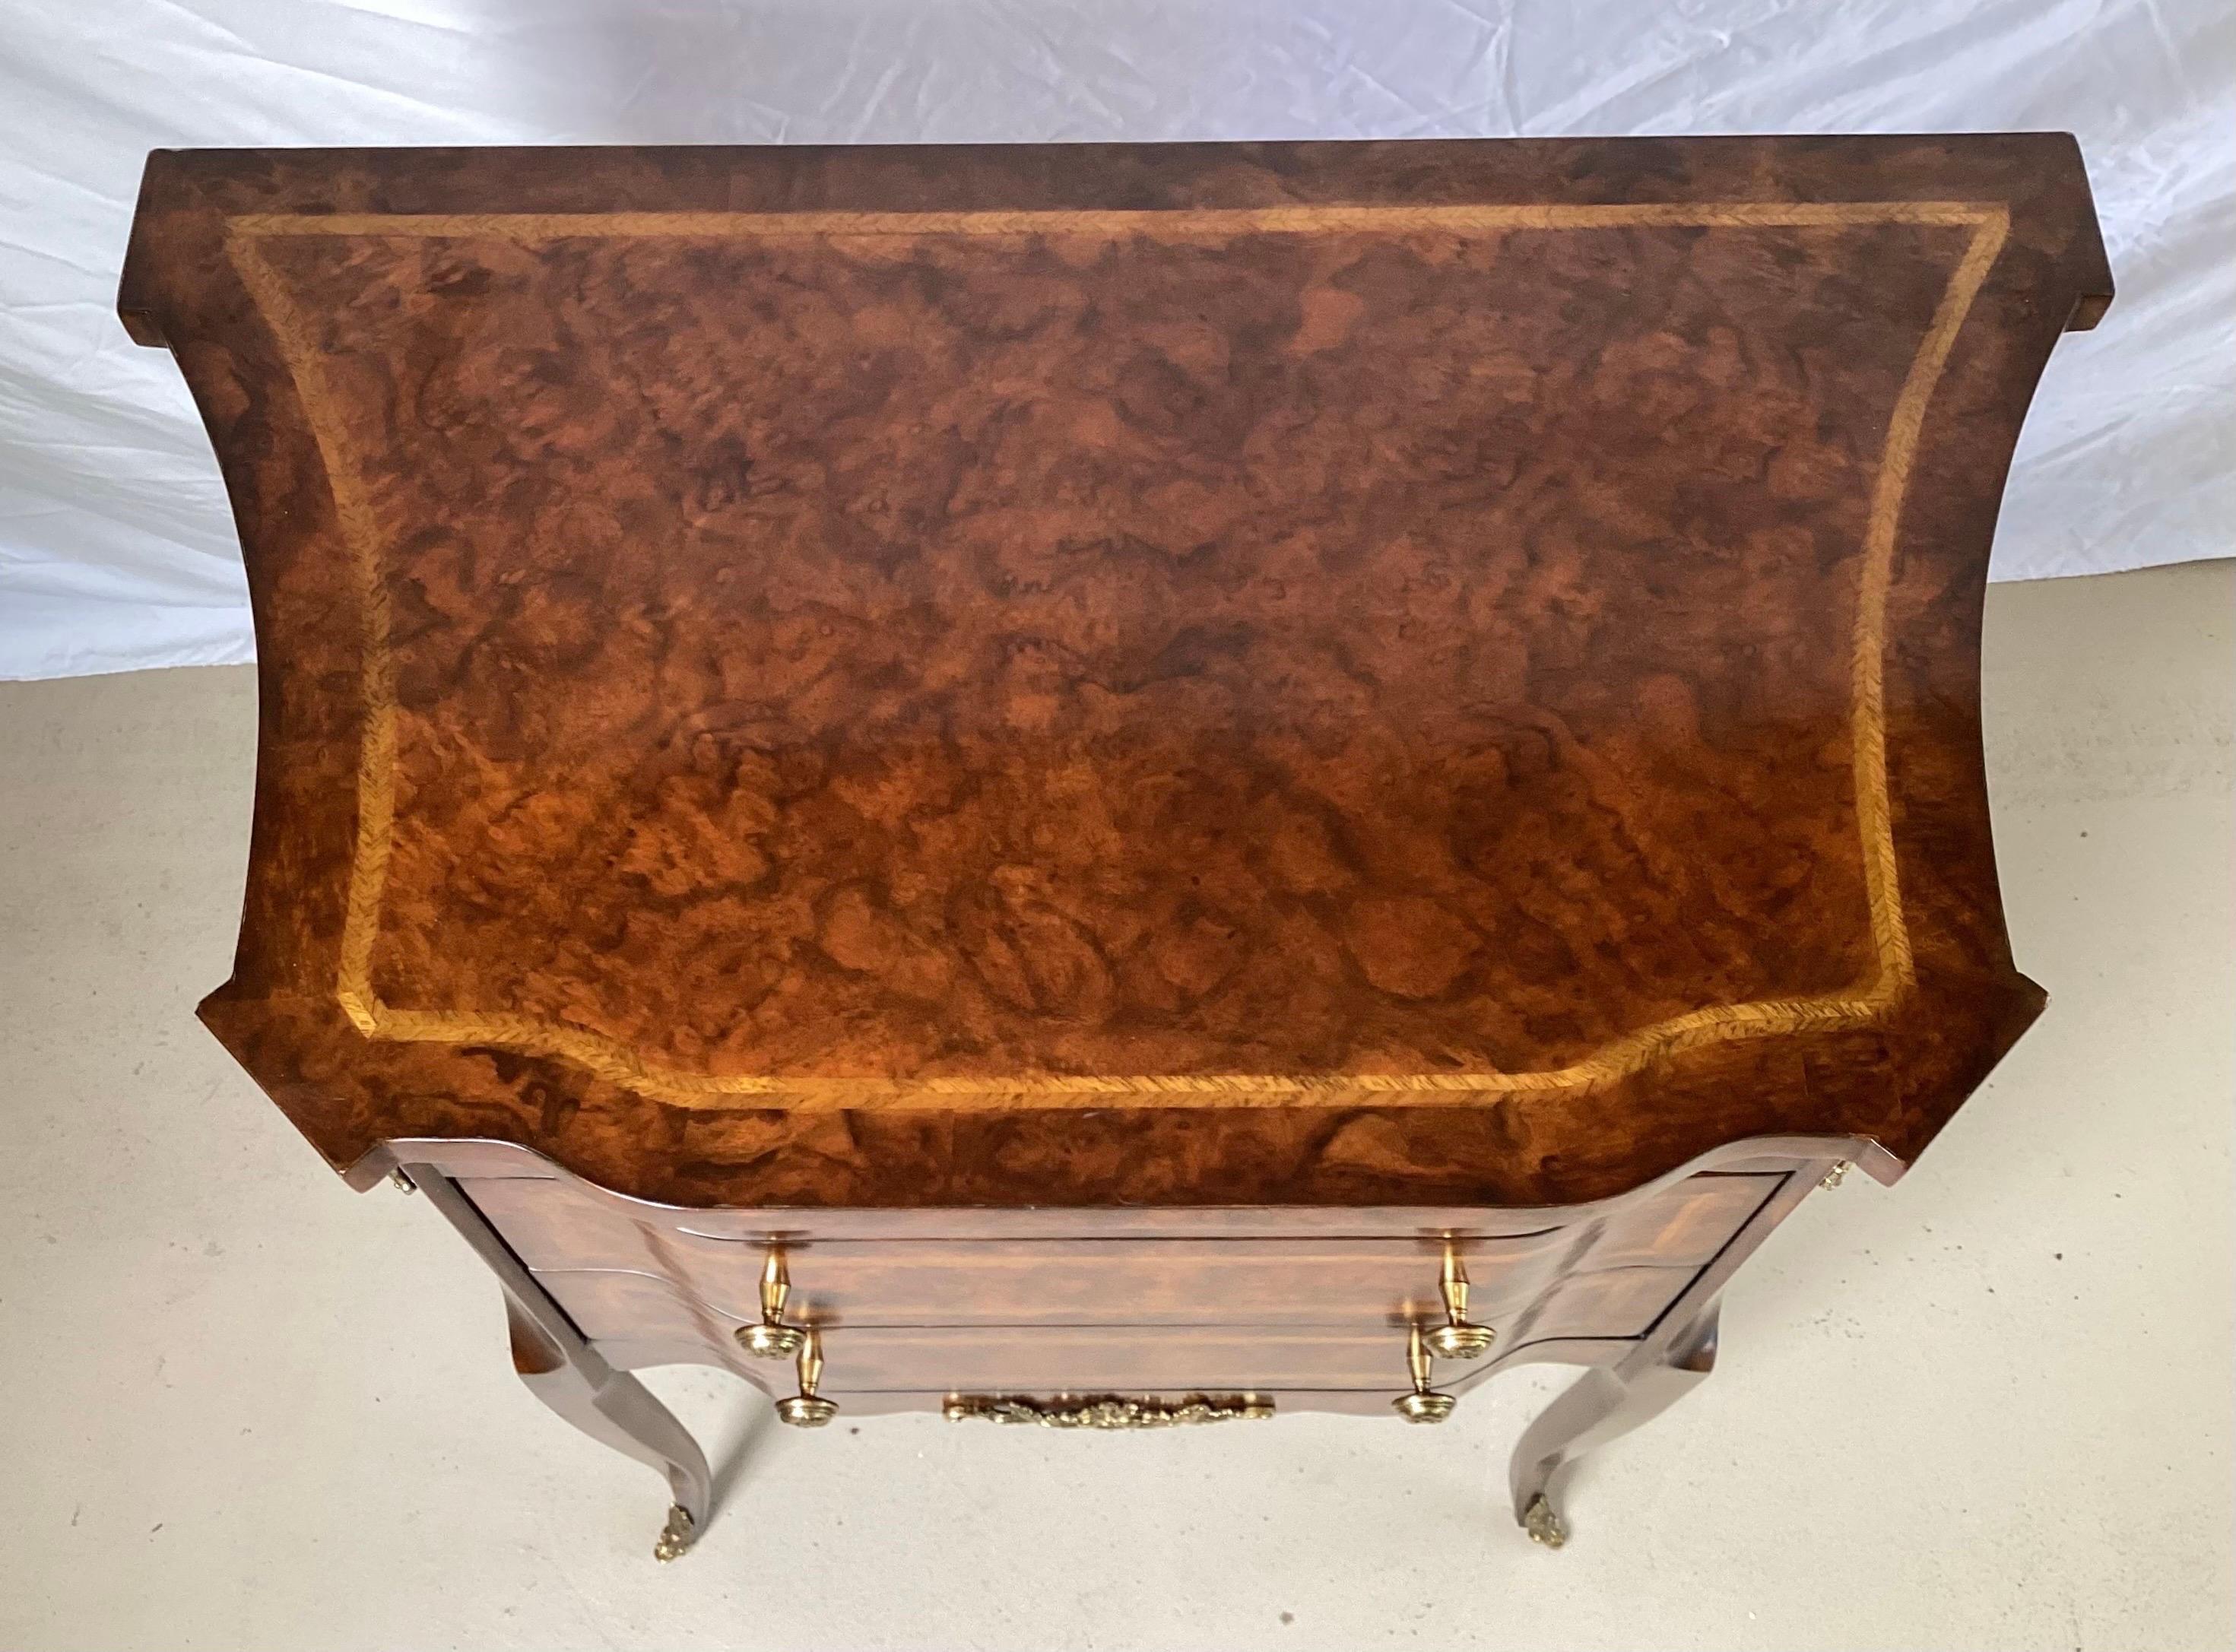 Unknown Diminutive Burl Walnut and Satinwood Two Drawer Commode by Maitland Smith